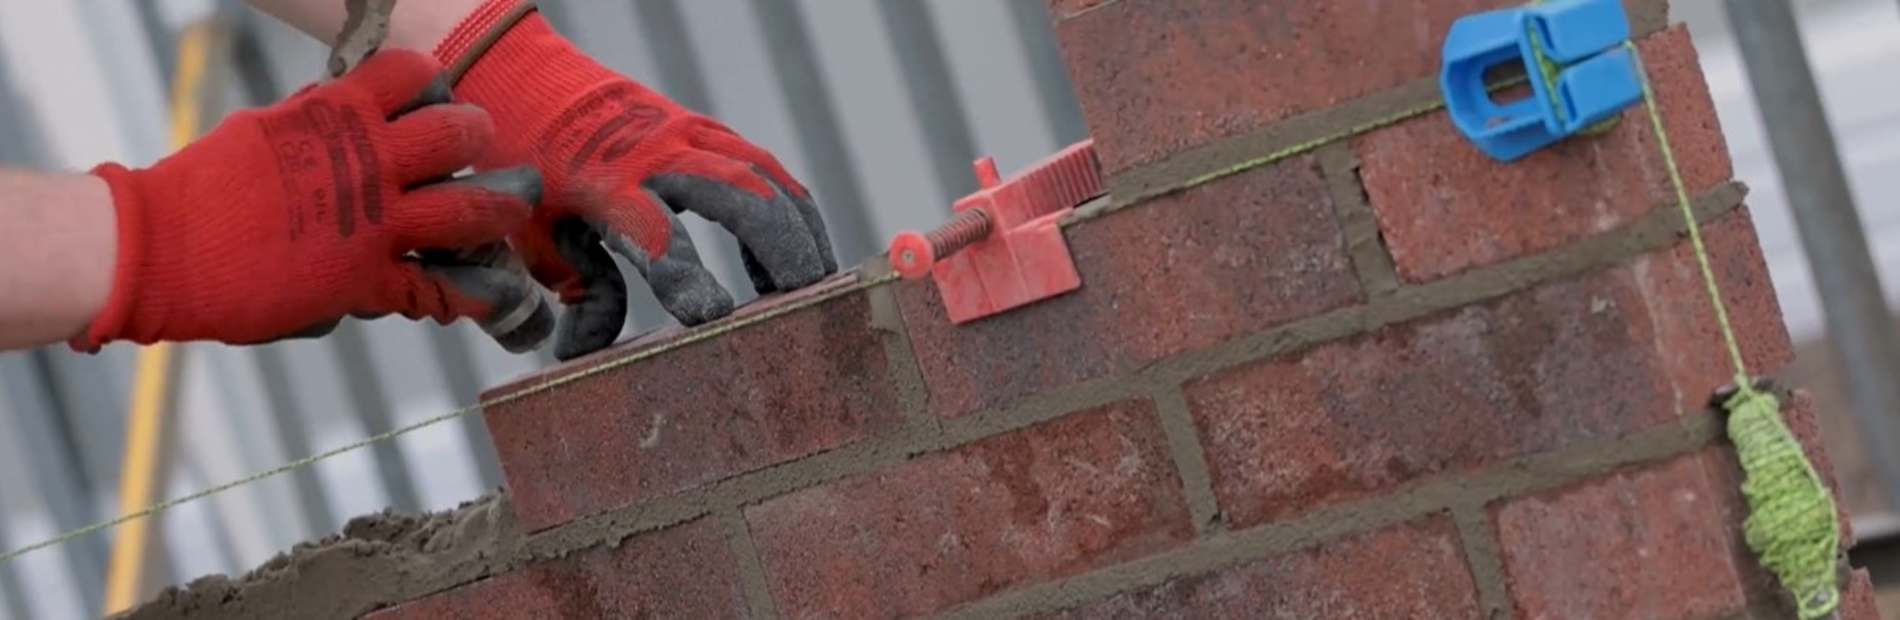 mortar being used on a wall